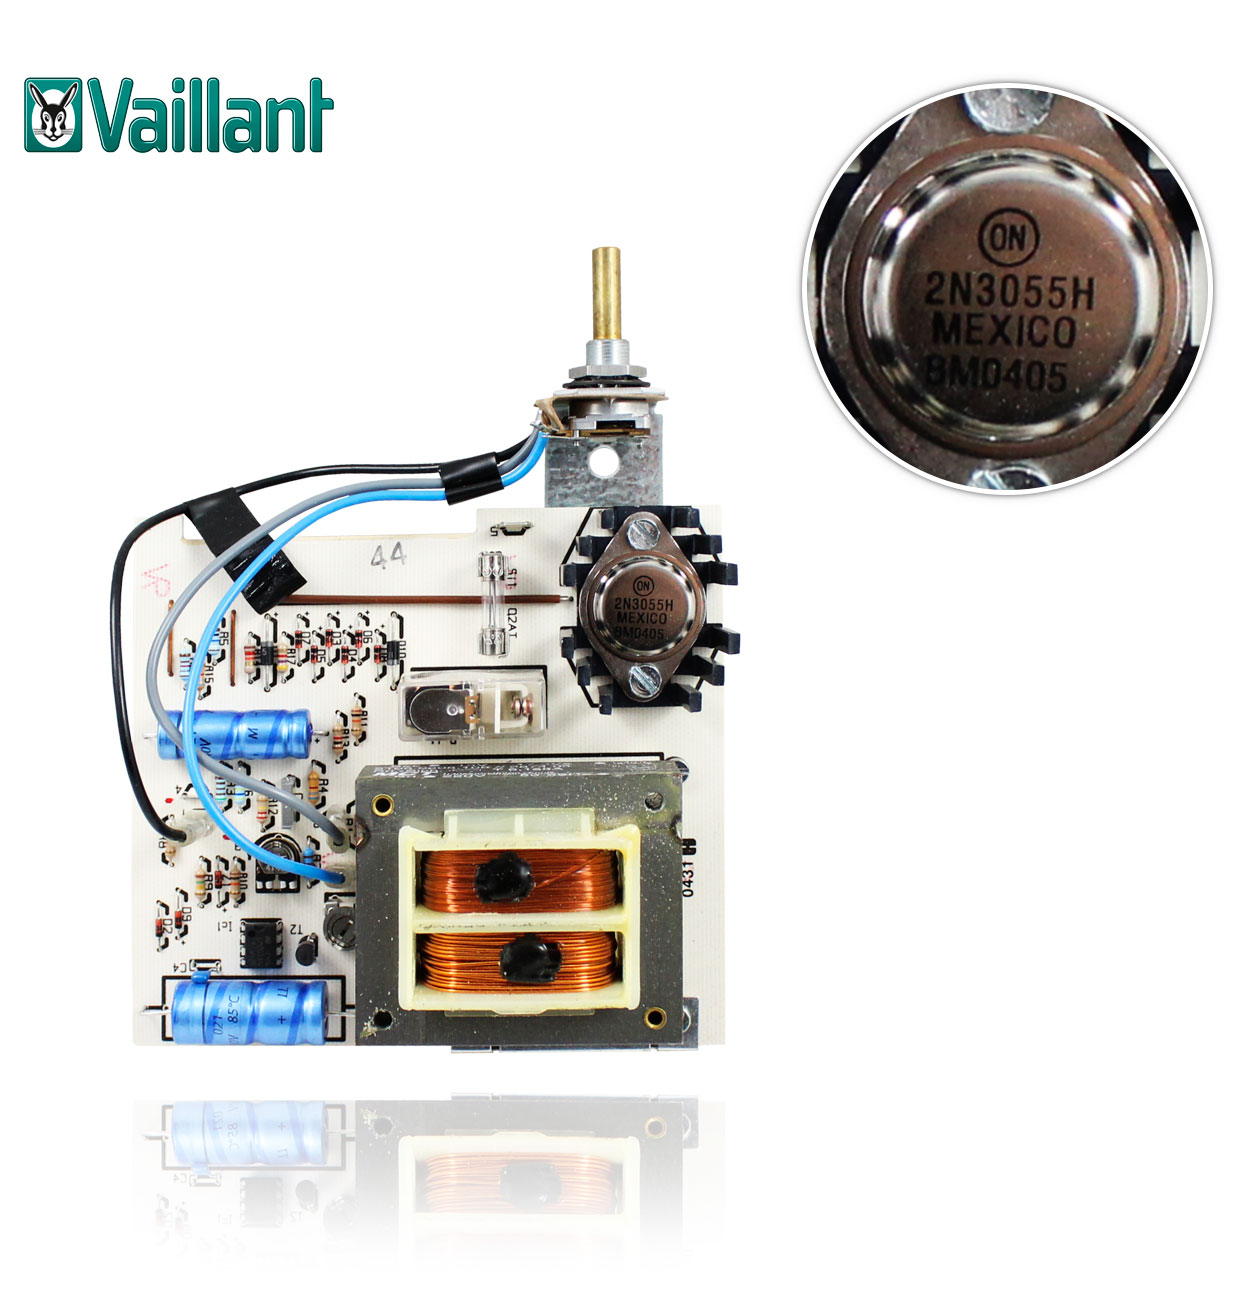 ELECTRONIC ASSEMBLY VAILLANT 252905